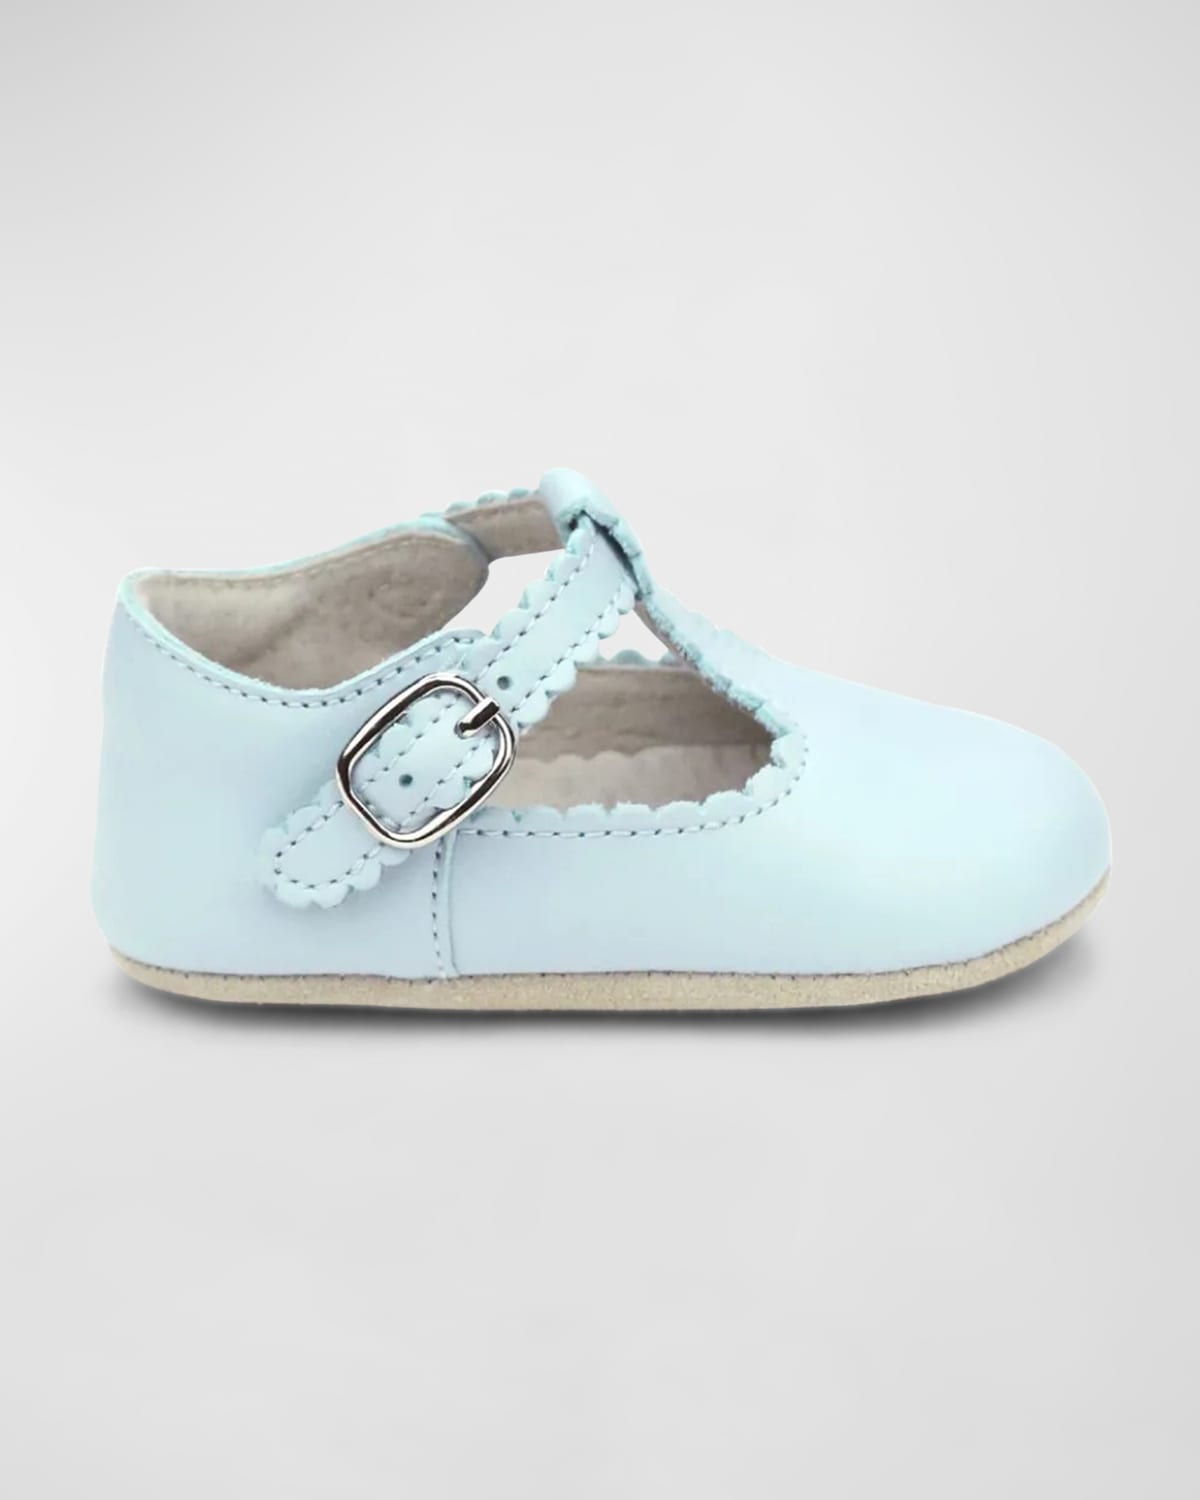 L'amour Shoes Kids' Girl's Elodie Scalloped Mary Jane Shoes, Newborn/baby In Light Blue